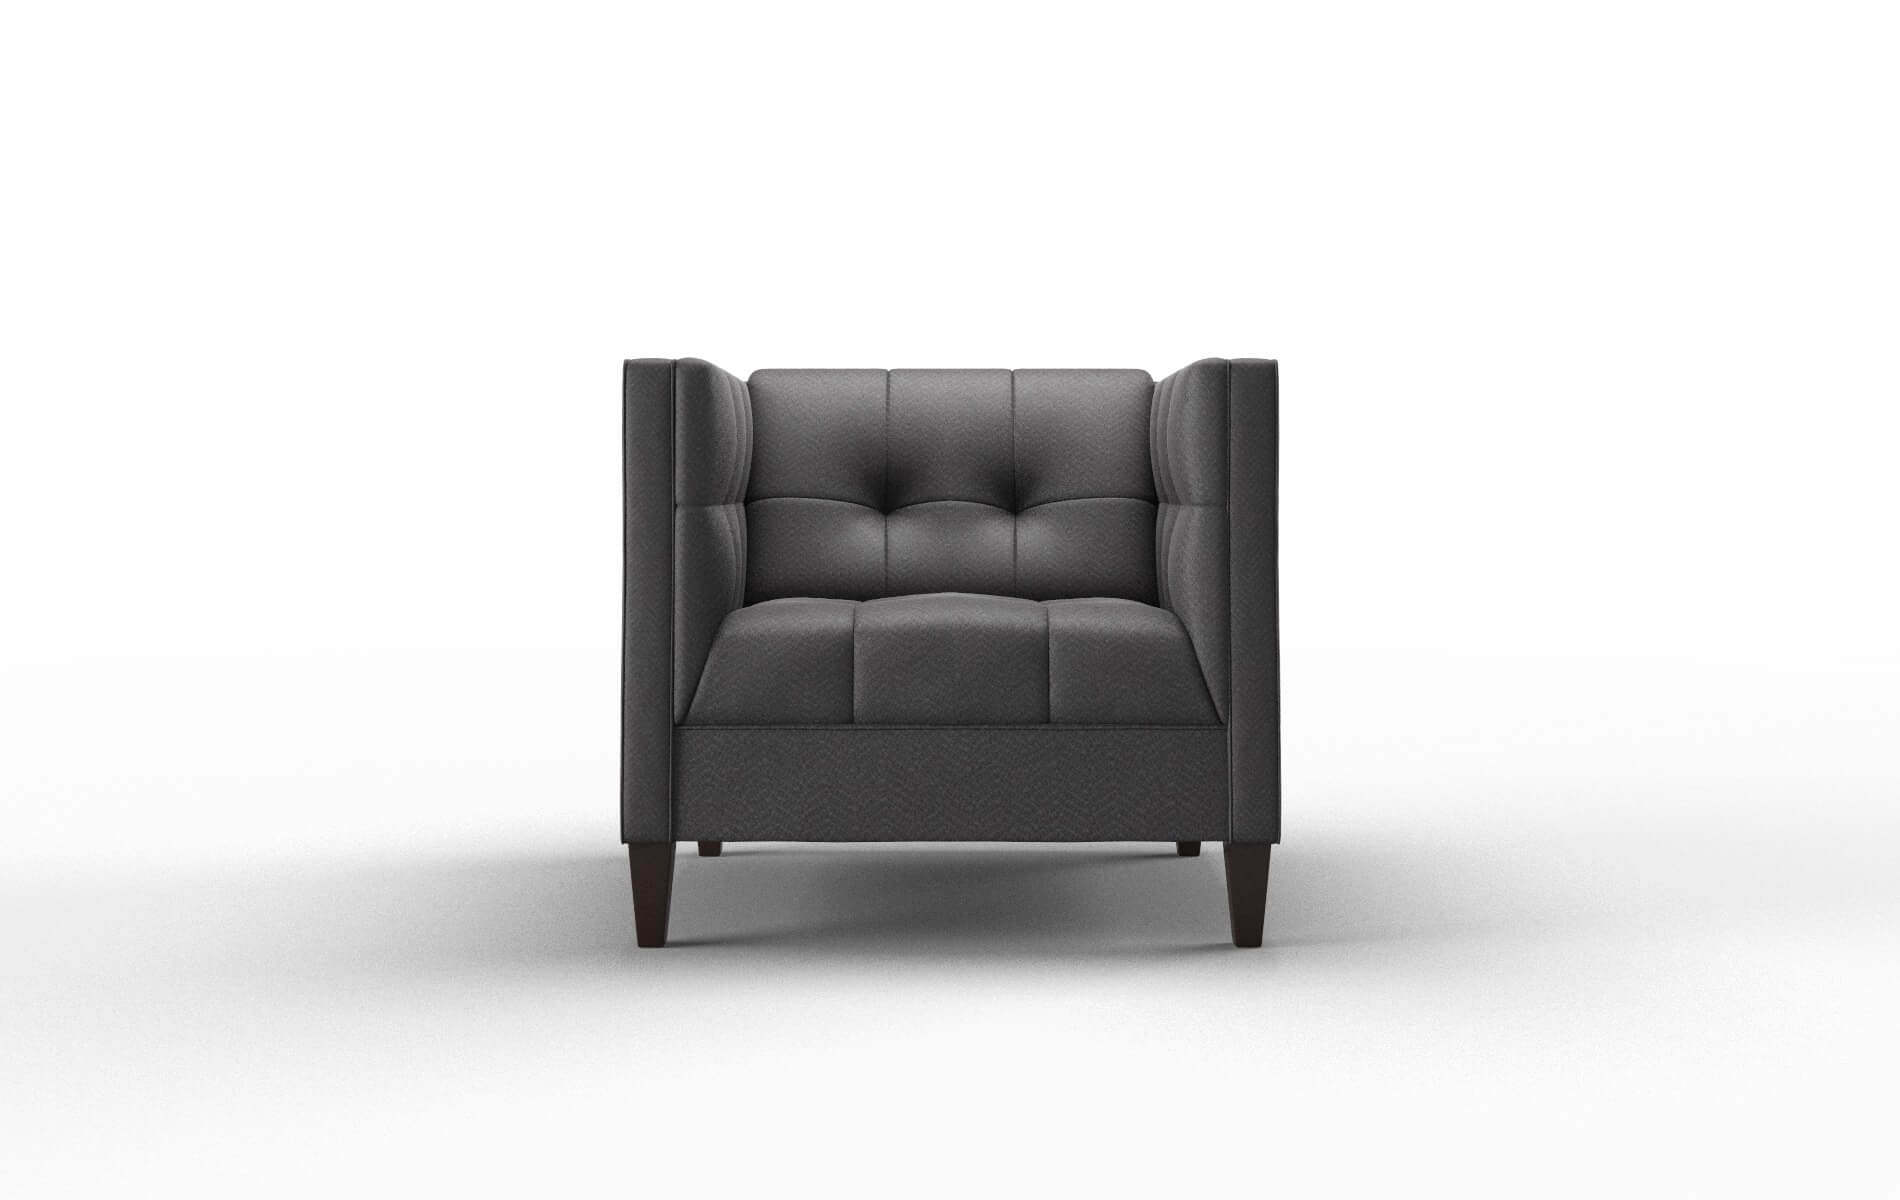 Messina Catalina Charcoal chair espresso legs